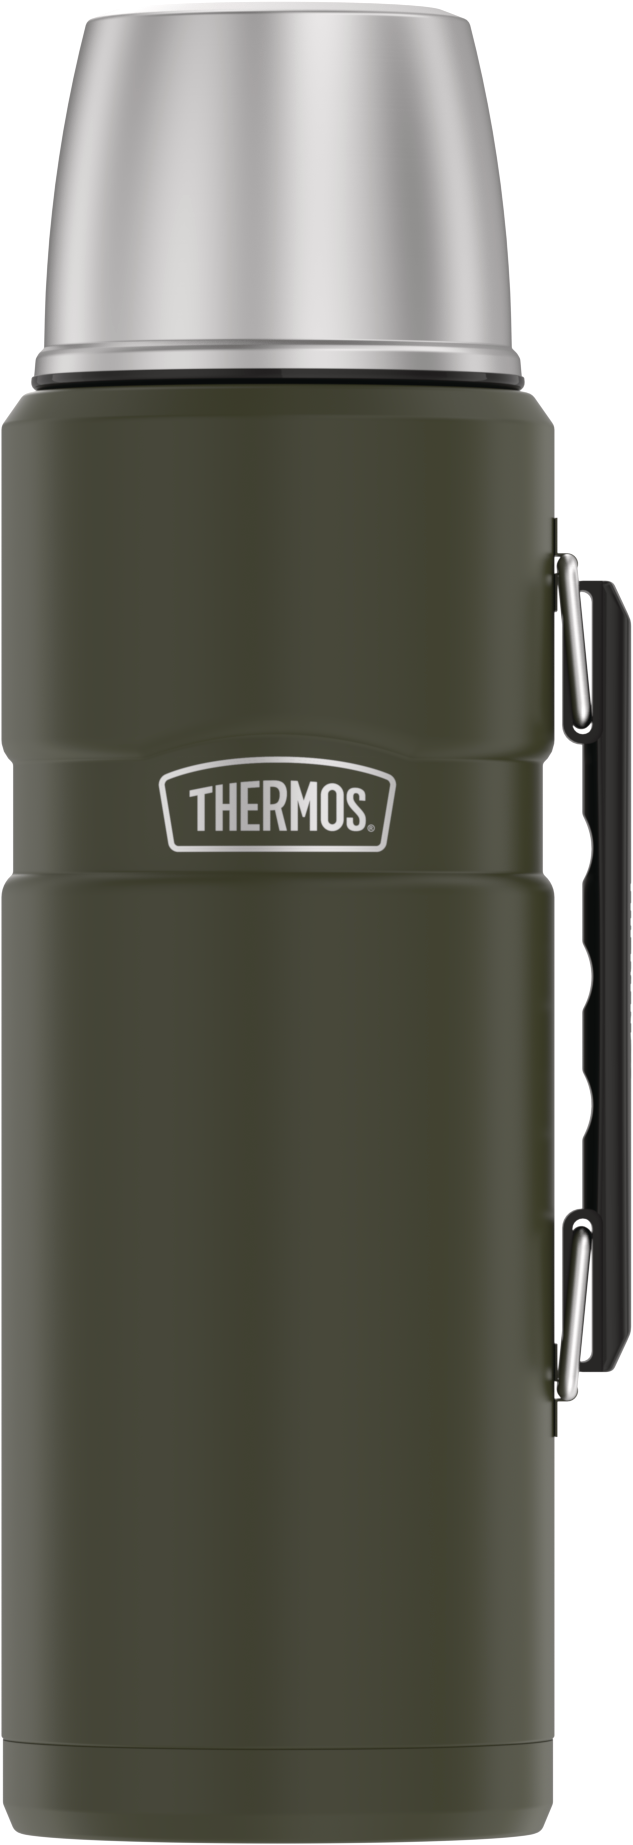 https://corporate.alfi.de/media/2021-09-01-thermos-now-cooperating-with-dmax/7302263120.png